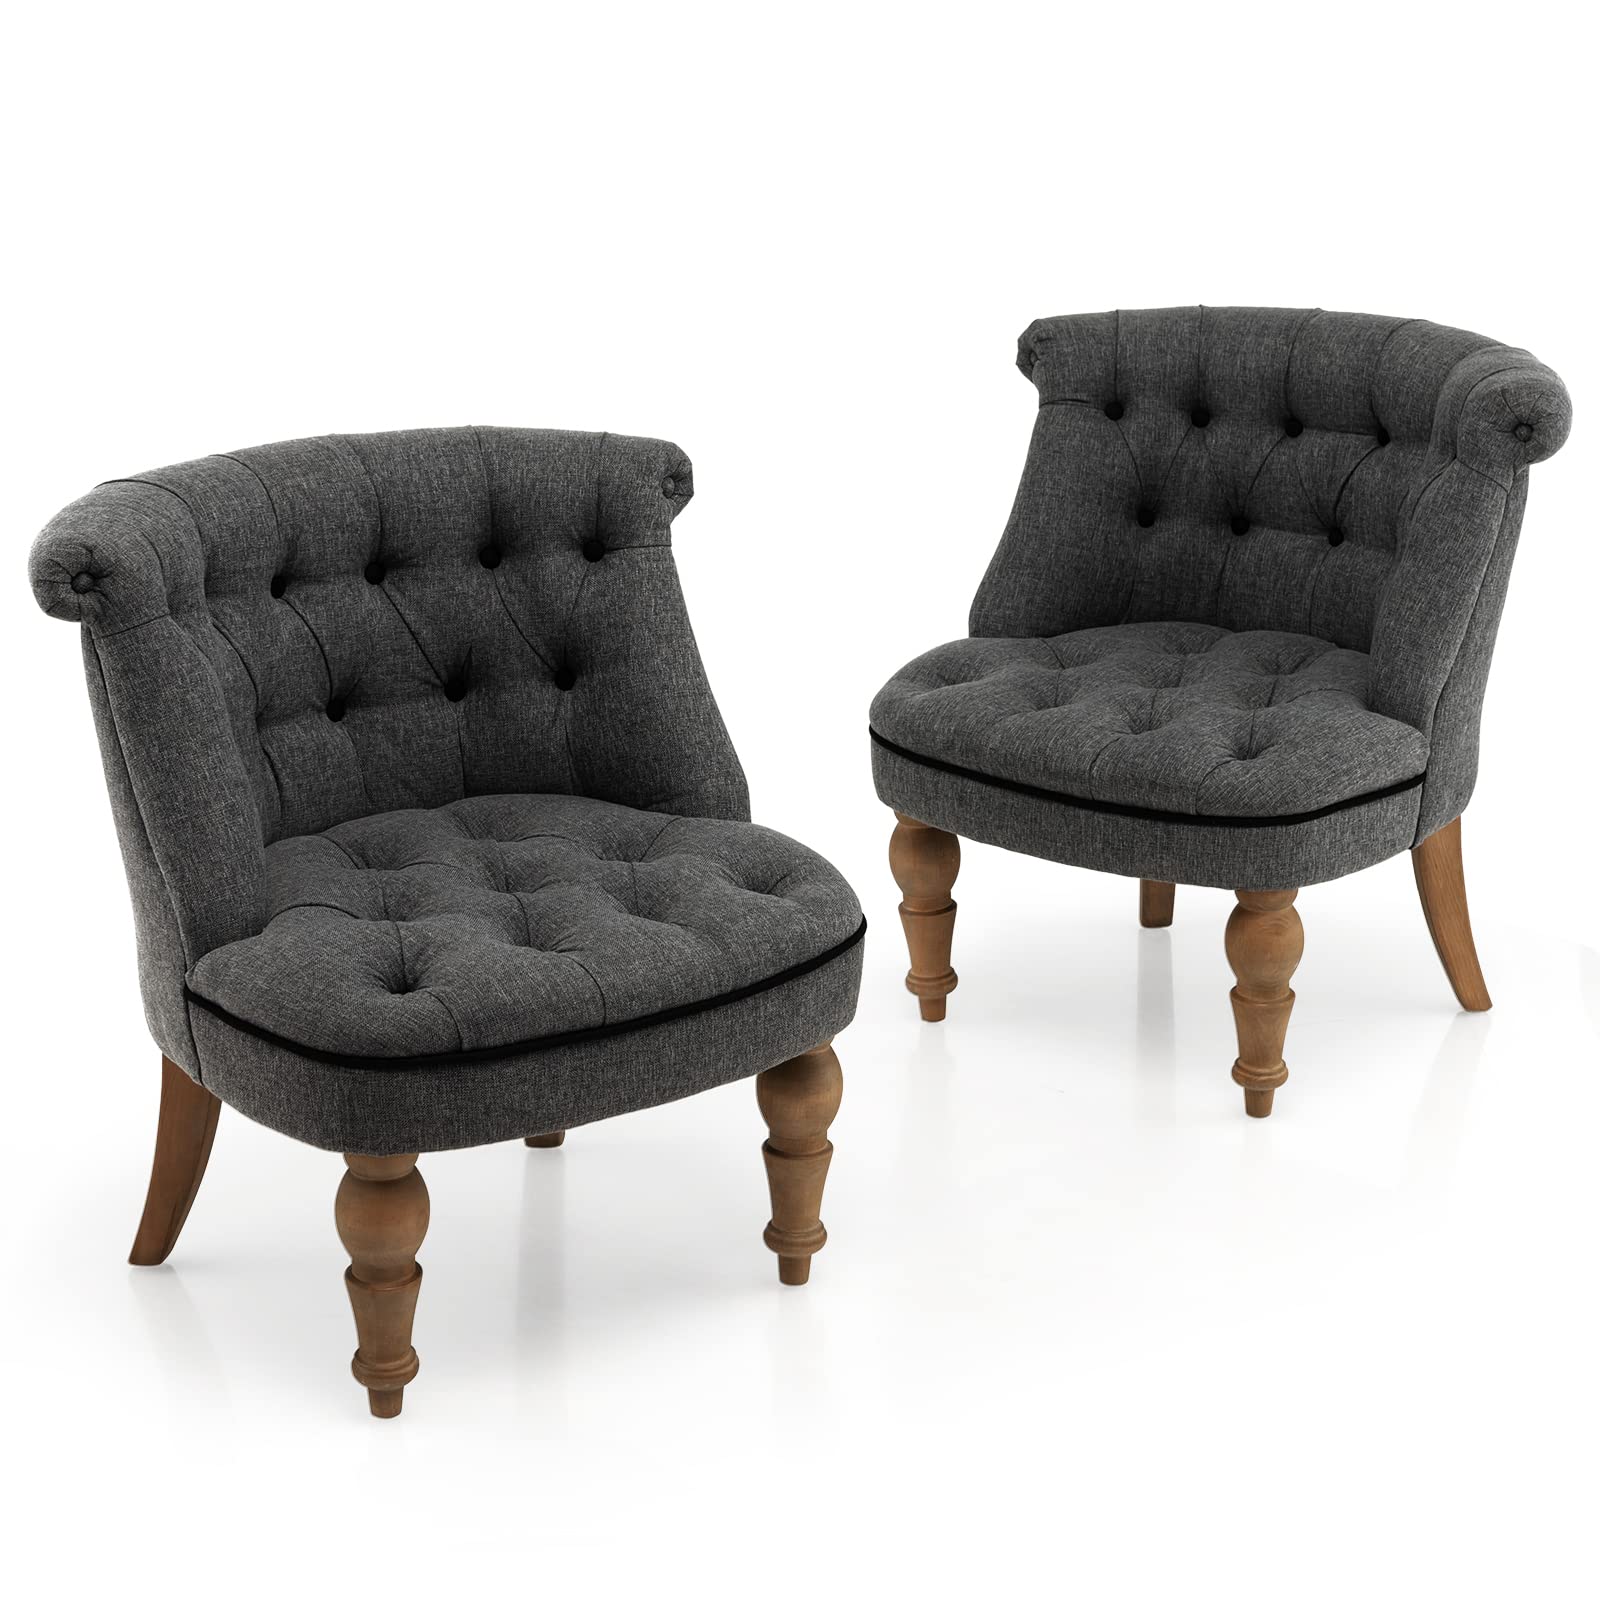 Giantex Accent Chair Set of 2, Single Sofa Chair with Tufted Backrests, Beech Wood Legs, Gray